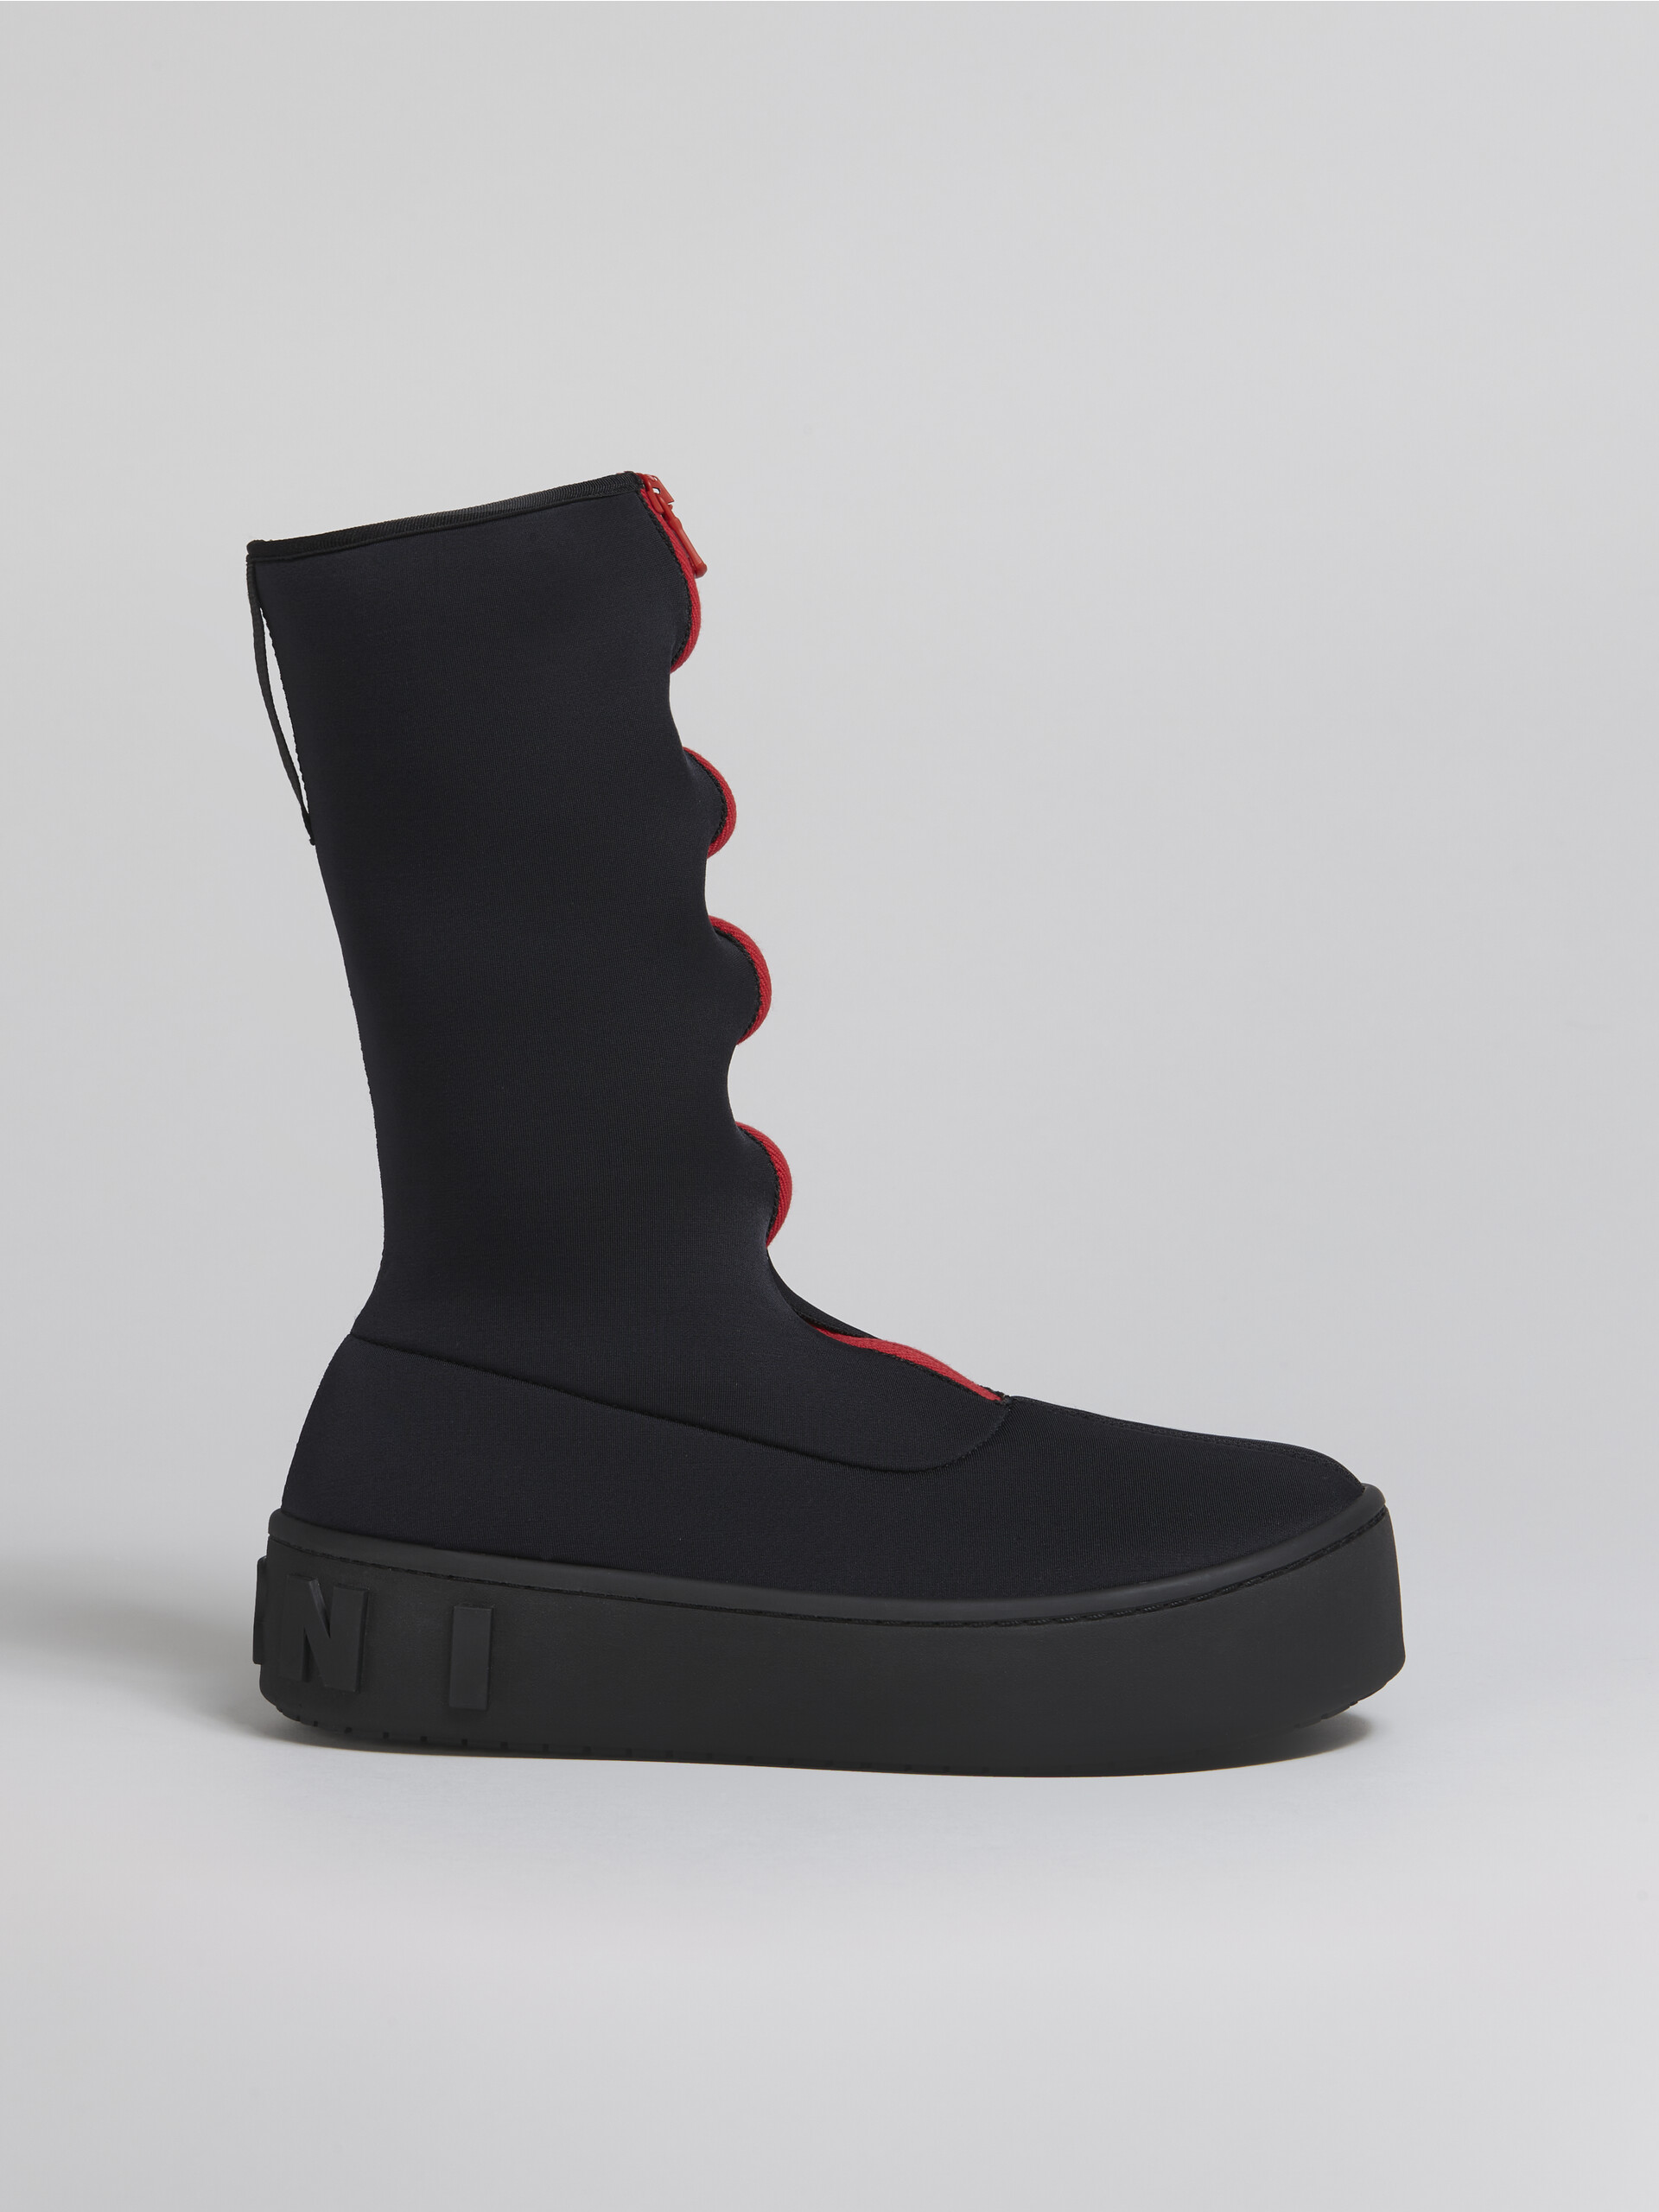 Bootie in stretch neoprene - Boots - Image 1